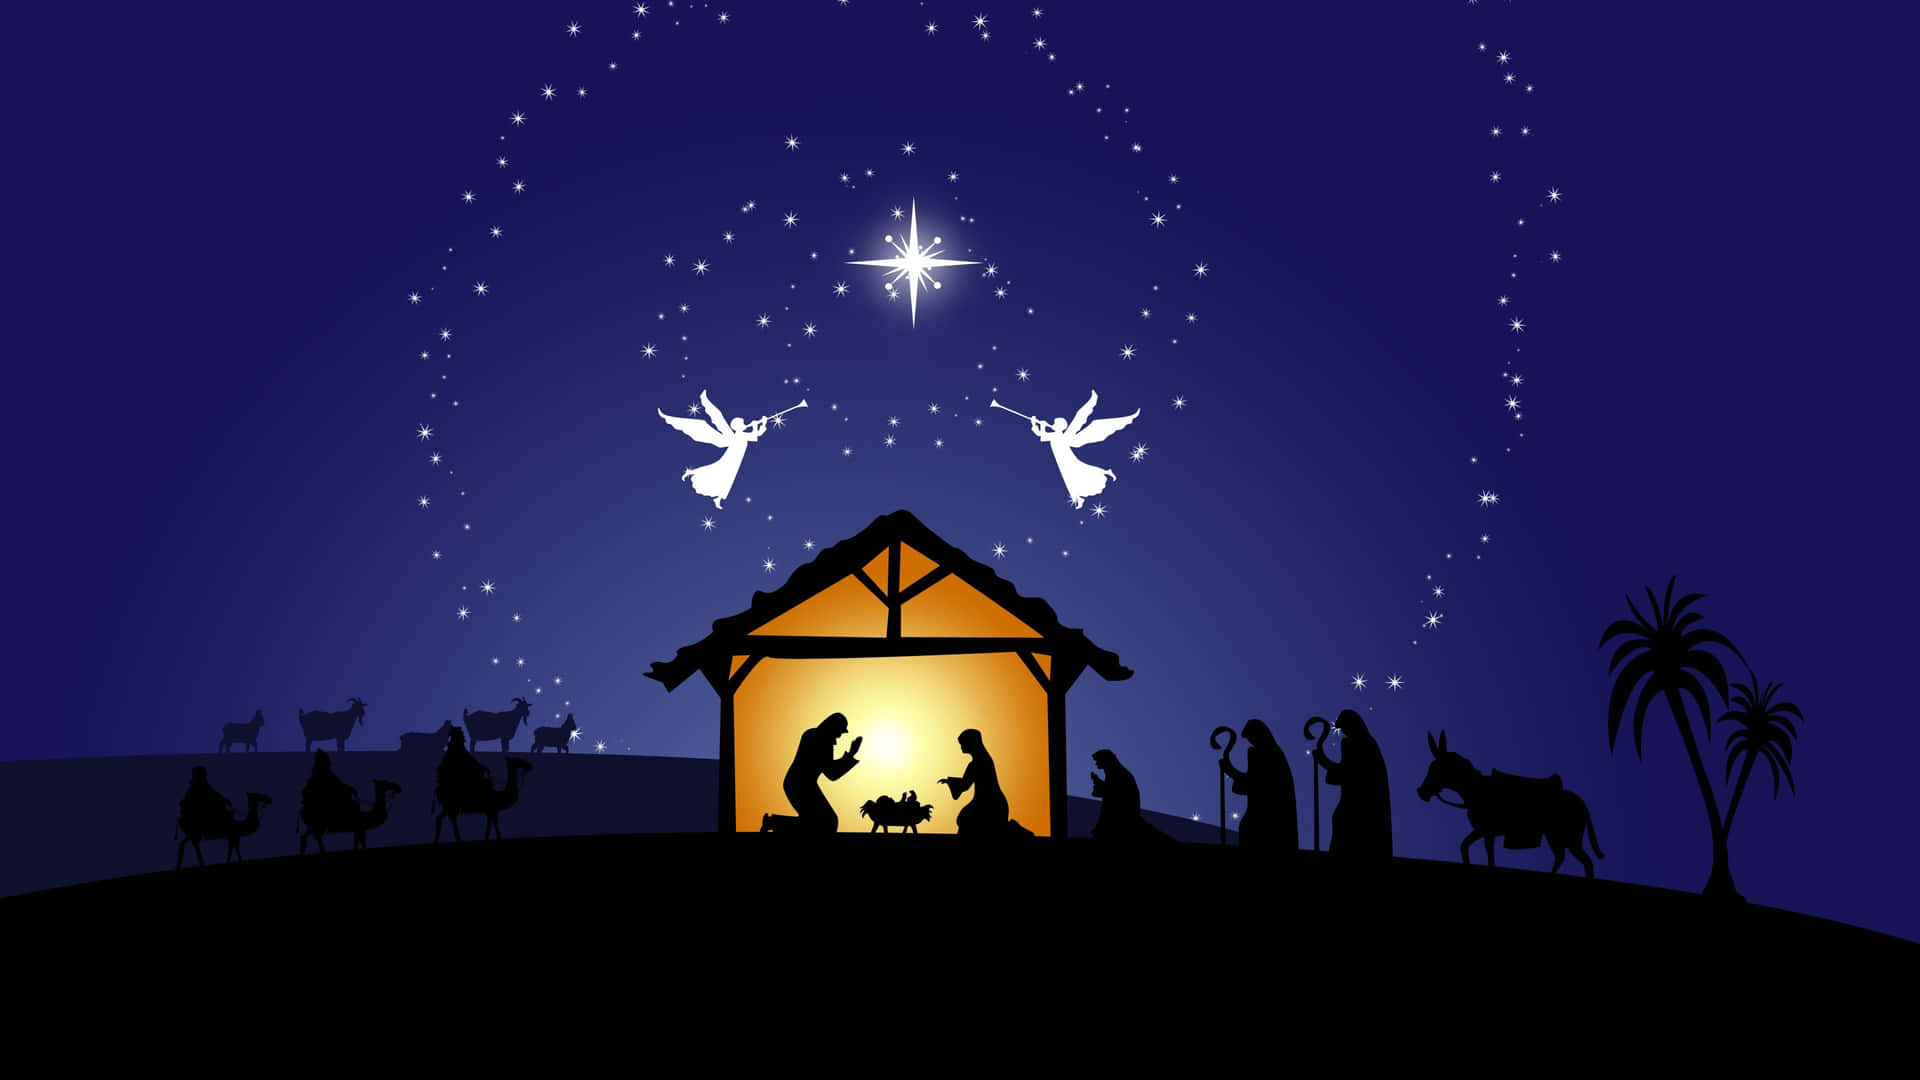 A Nativity Scene in the snow on a starry night. Wallpaper